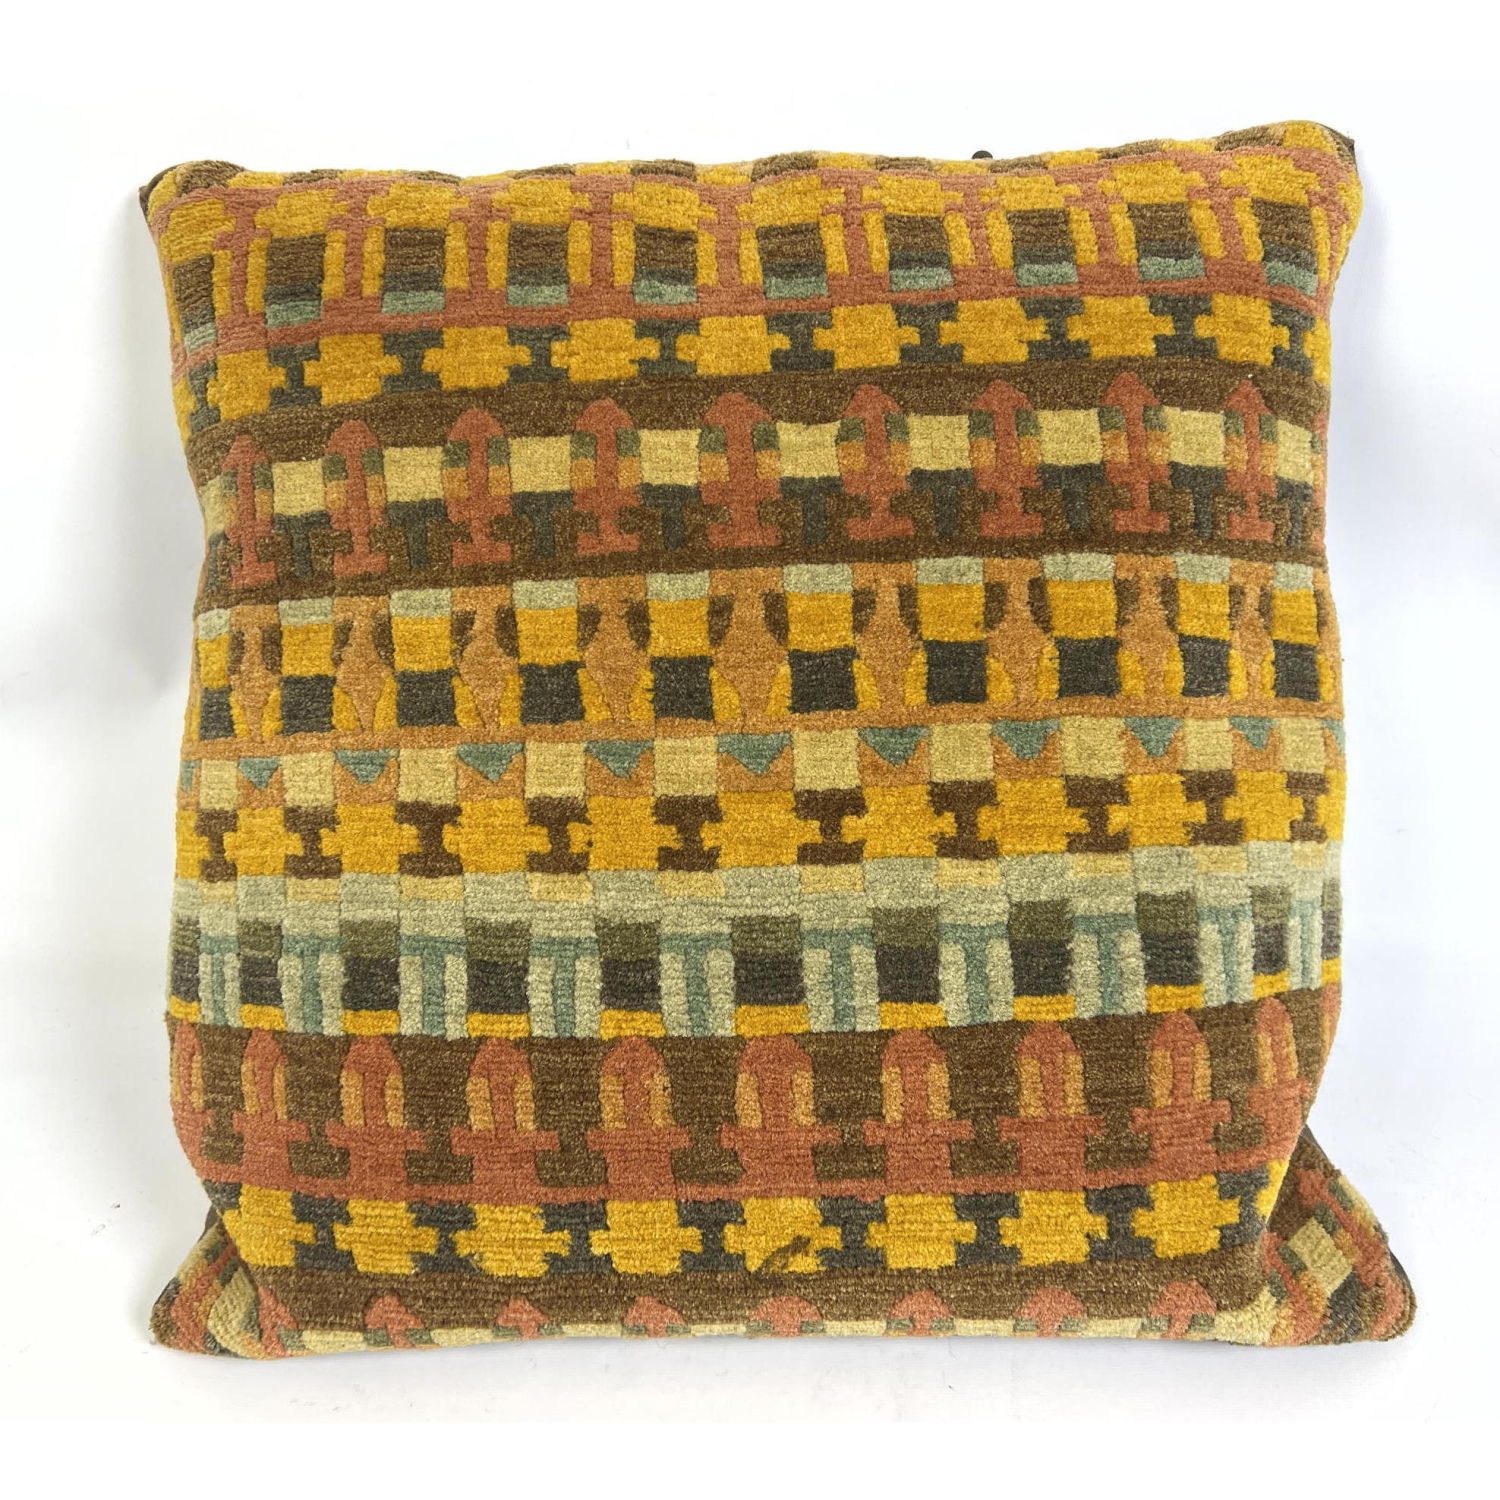 Colorful woven tribal pillow 

Dimensions: